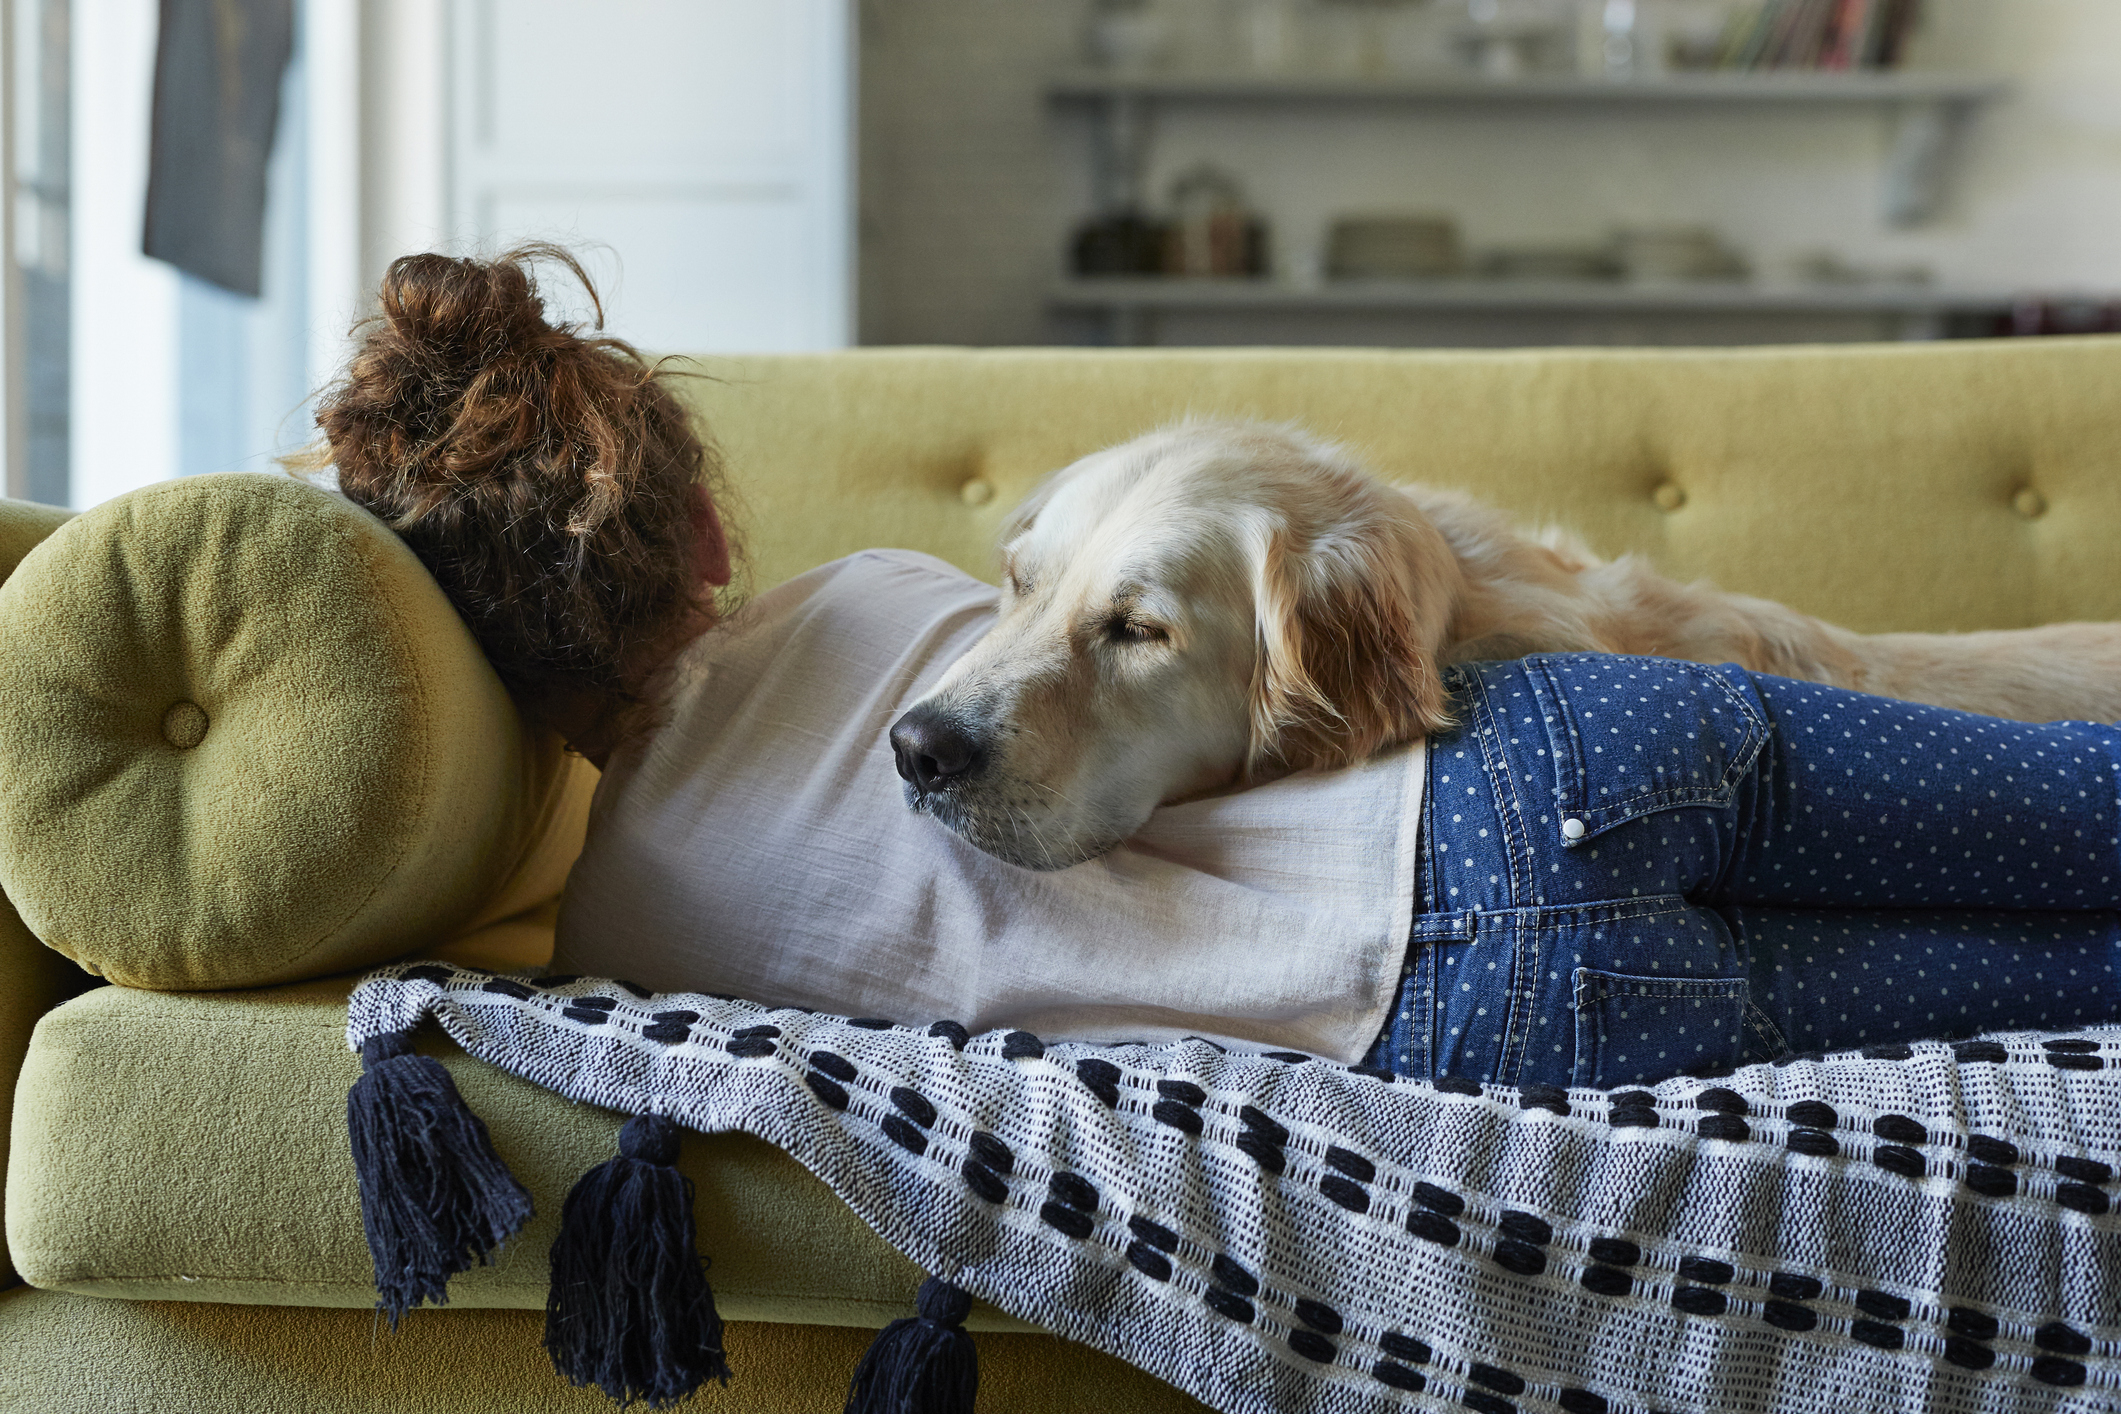 Person resting on couch with a golden retriever lying on top. They are covered by a blanket with a tasseled edge